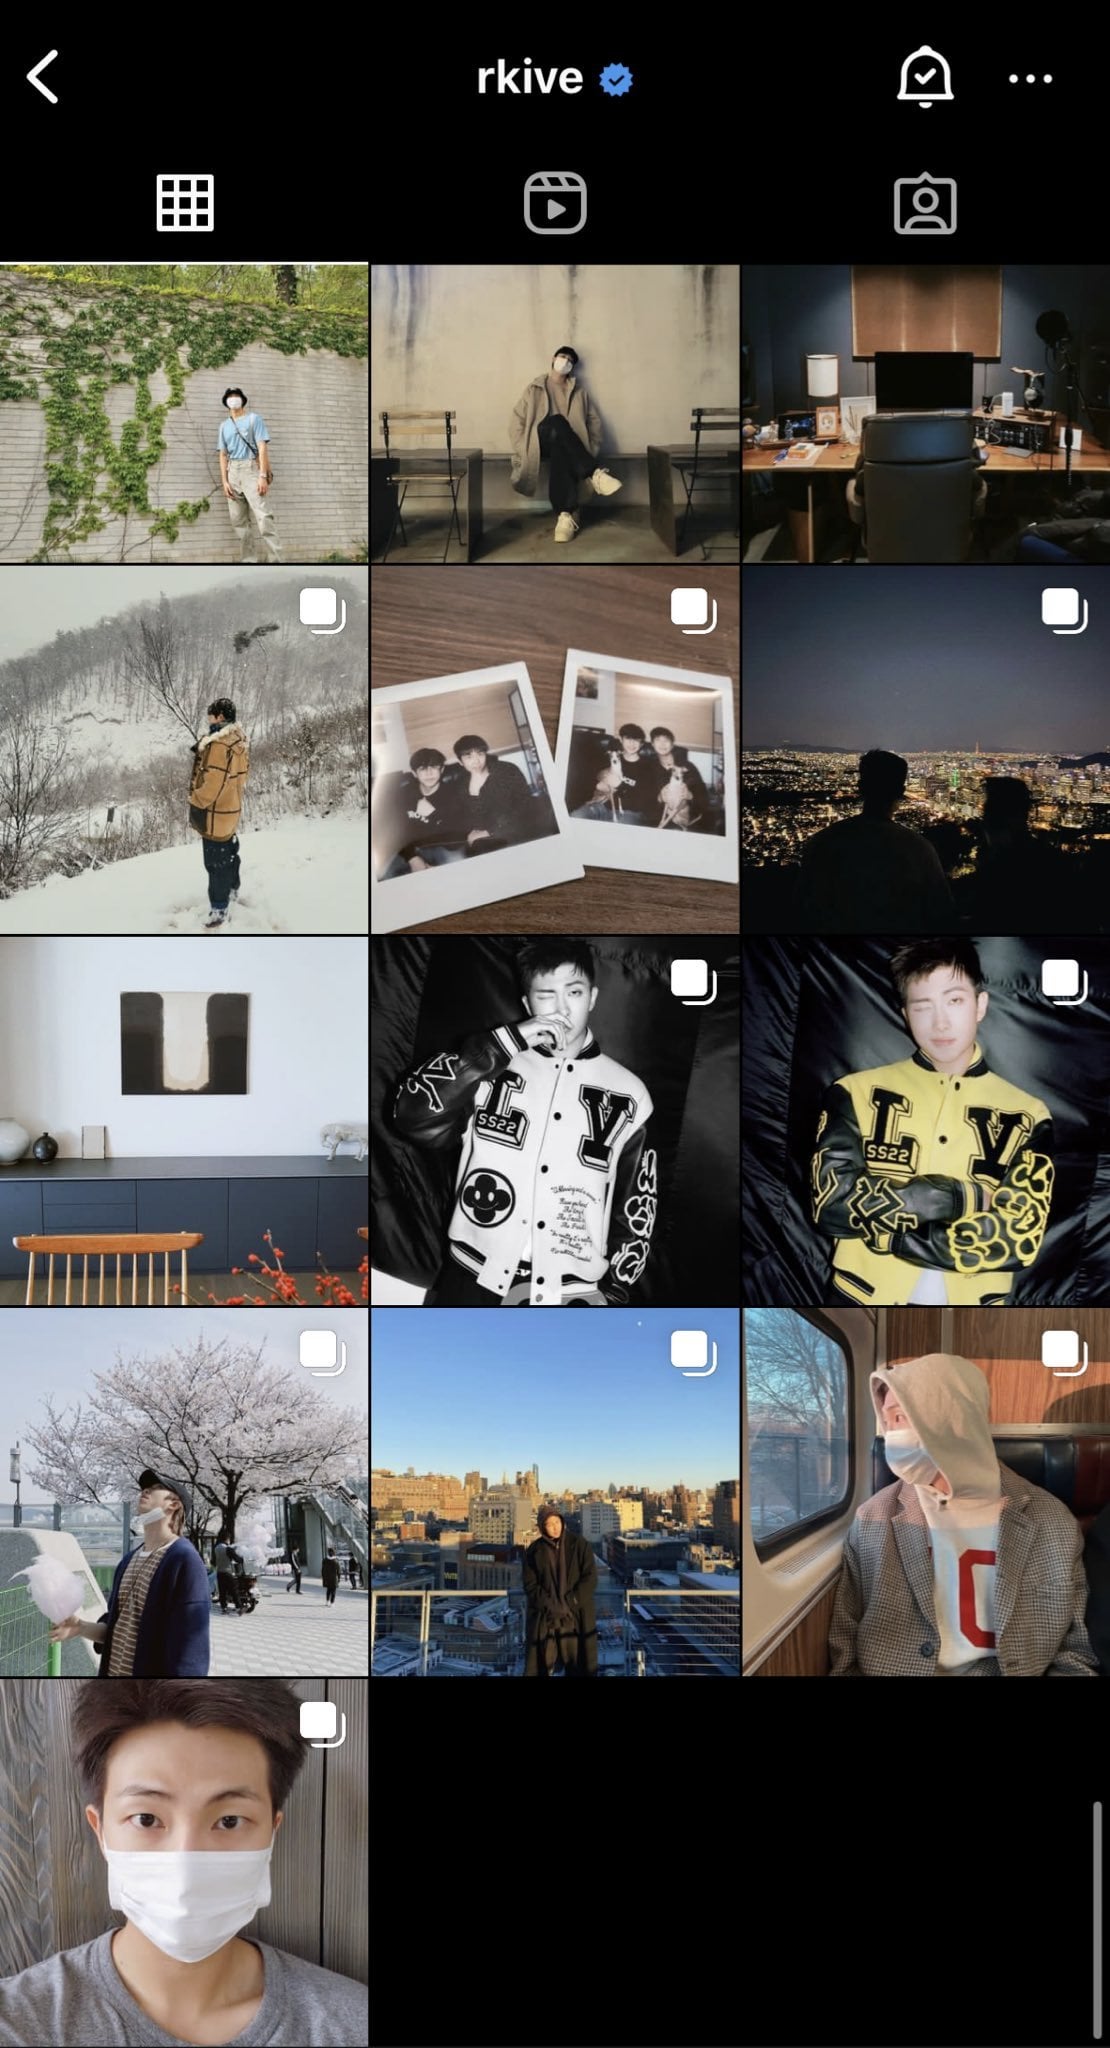 231119 RM deleted/archived all his posts about Indigo from his Instagram